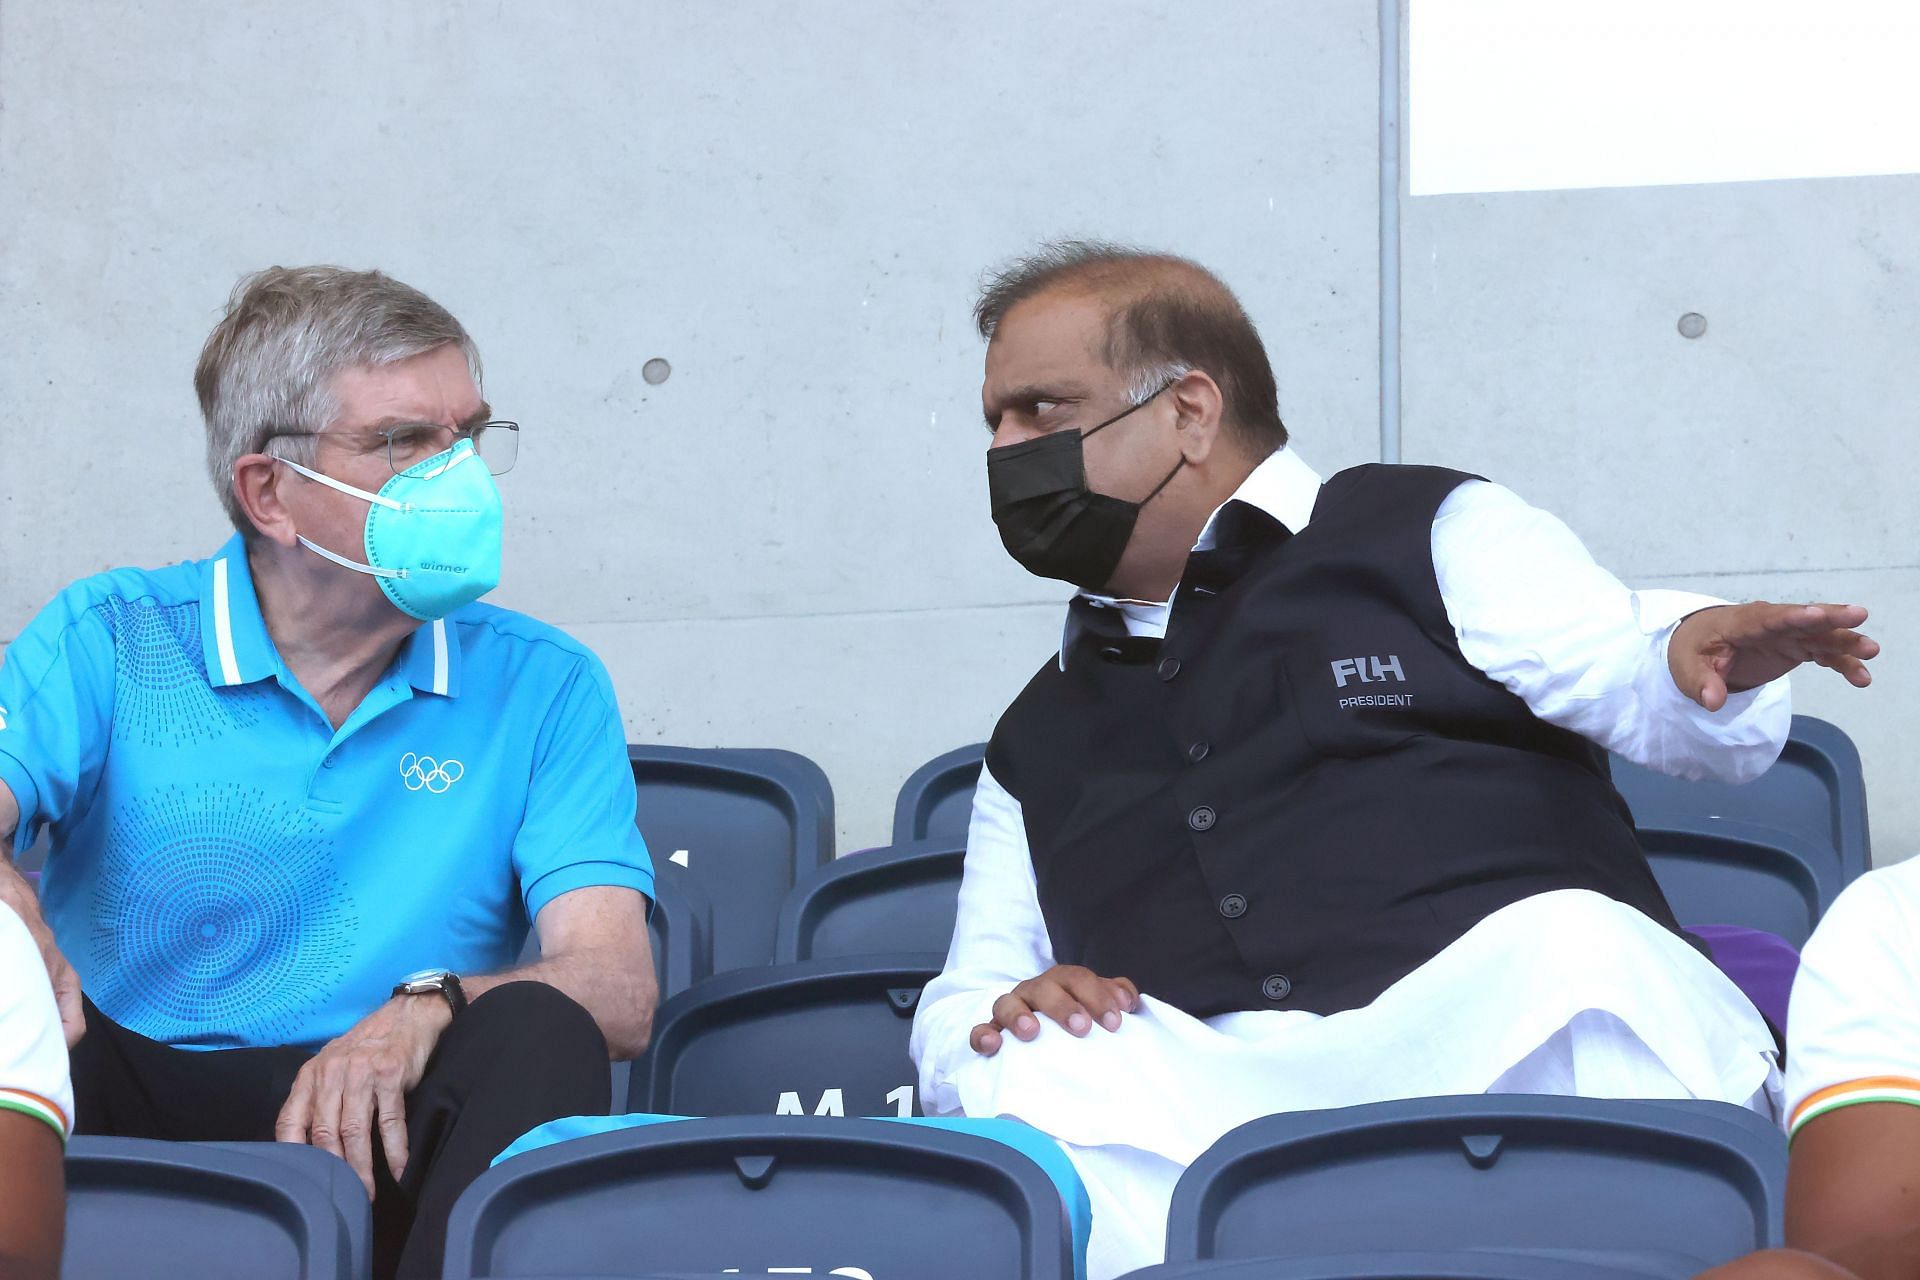 Narinder Batra (right) with IOC President Thomas Bach at the Tokyo Olympics. (PC: Getty Images)